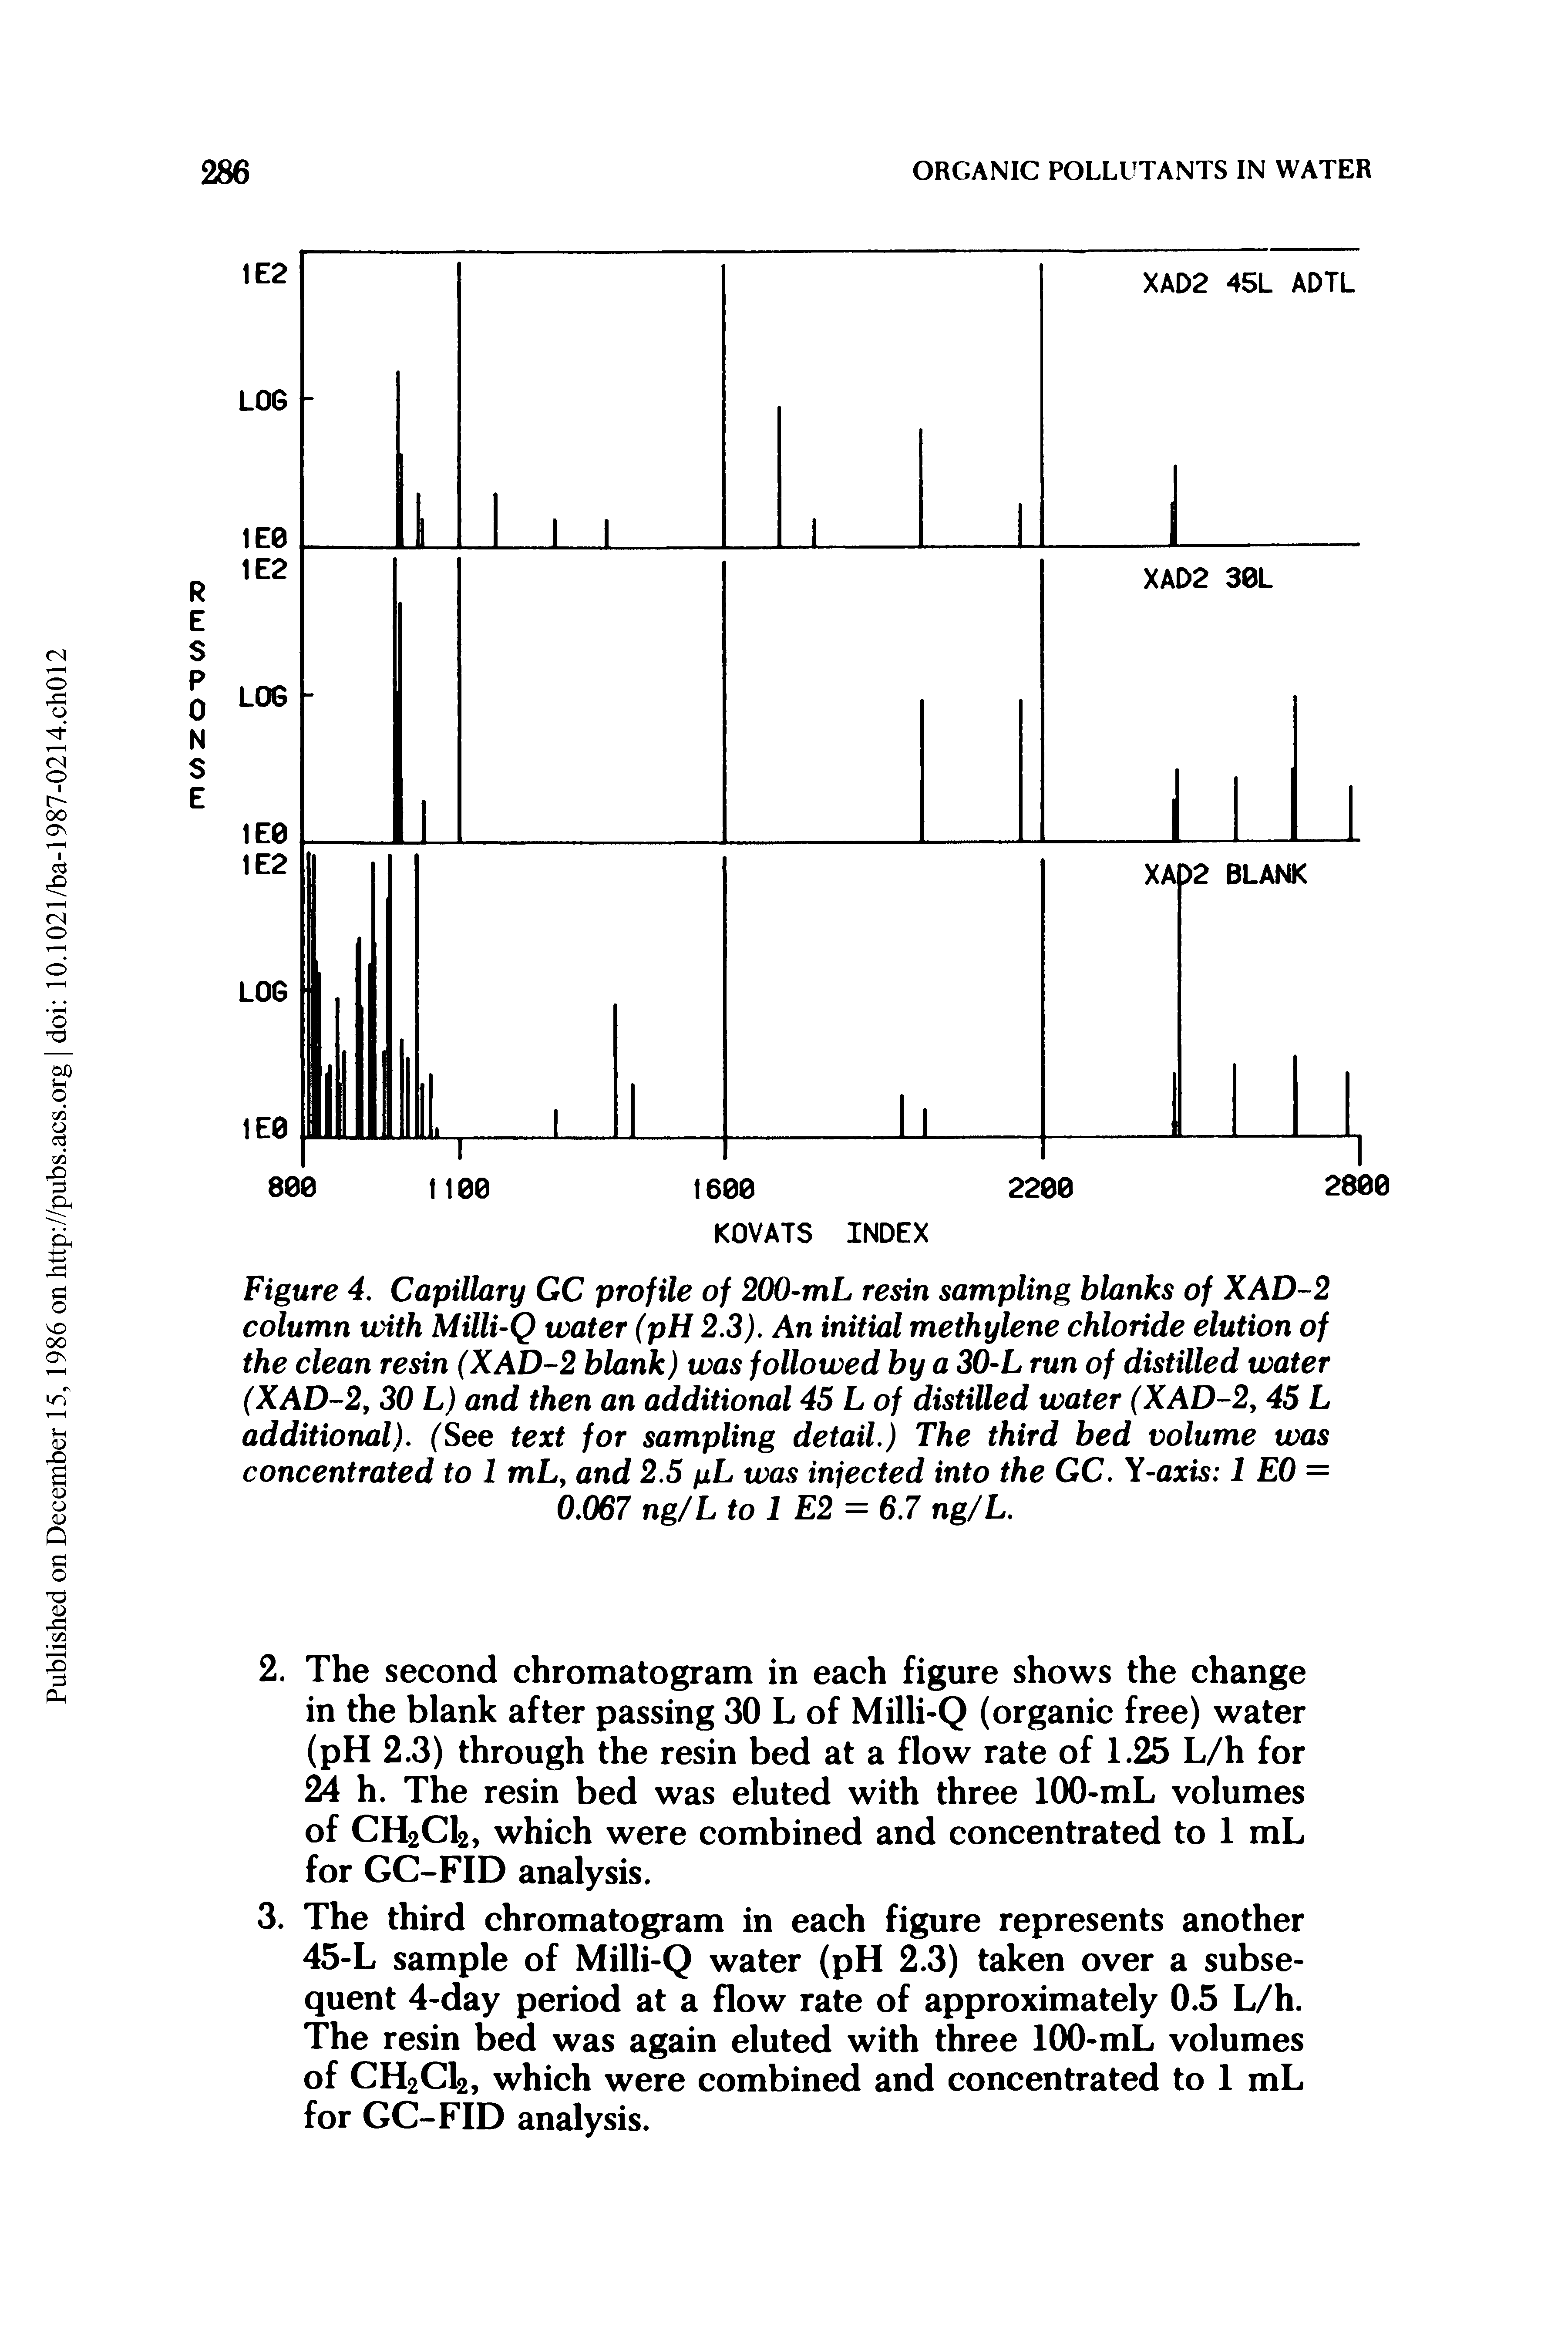 Figure 4. Capillary GC profile of 200-mL resin sampling blanks of XAD-2 column with Milli-Q water (pH 2.3). An initial methylene chloride elution of the clean resin (XAD-2 blank) was followed by a 30-L run of distilled water (XAD-2, 30 L) and then an additional 45 L of distilled water (XAD-2, 45 L additional). (See text for sampling detail.) The third bed volume was concentrated to 1 mL, and 2.5 pL was injected into the GC. Y-axis 1 E0 = 0.067 ng/L tol E2 = 6.7 ng/L.